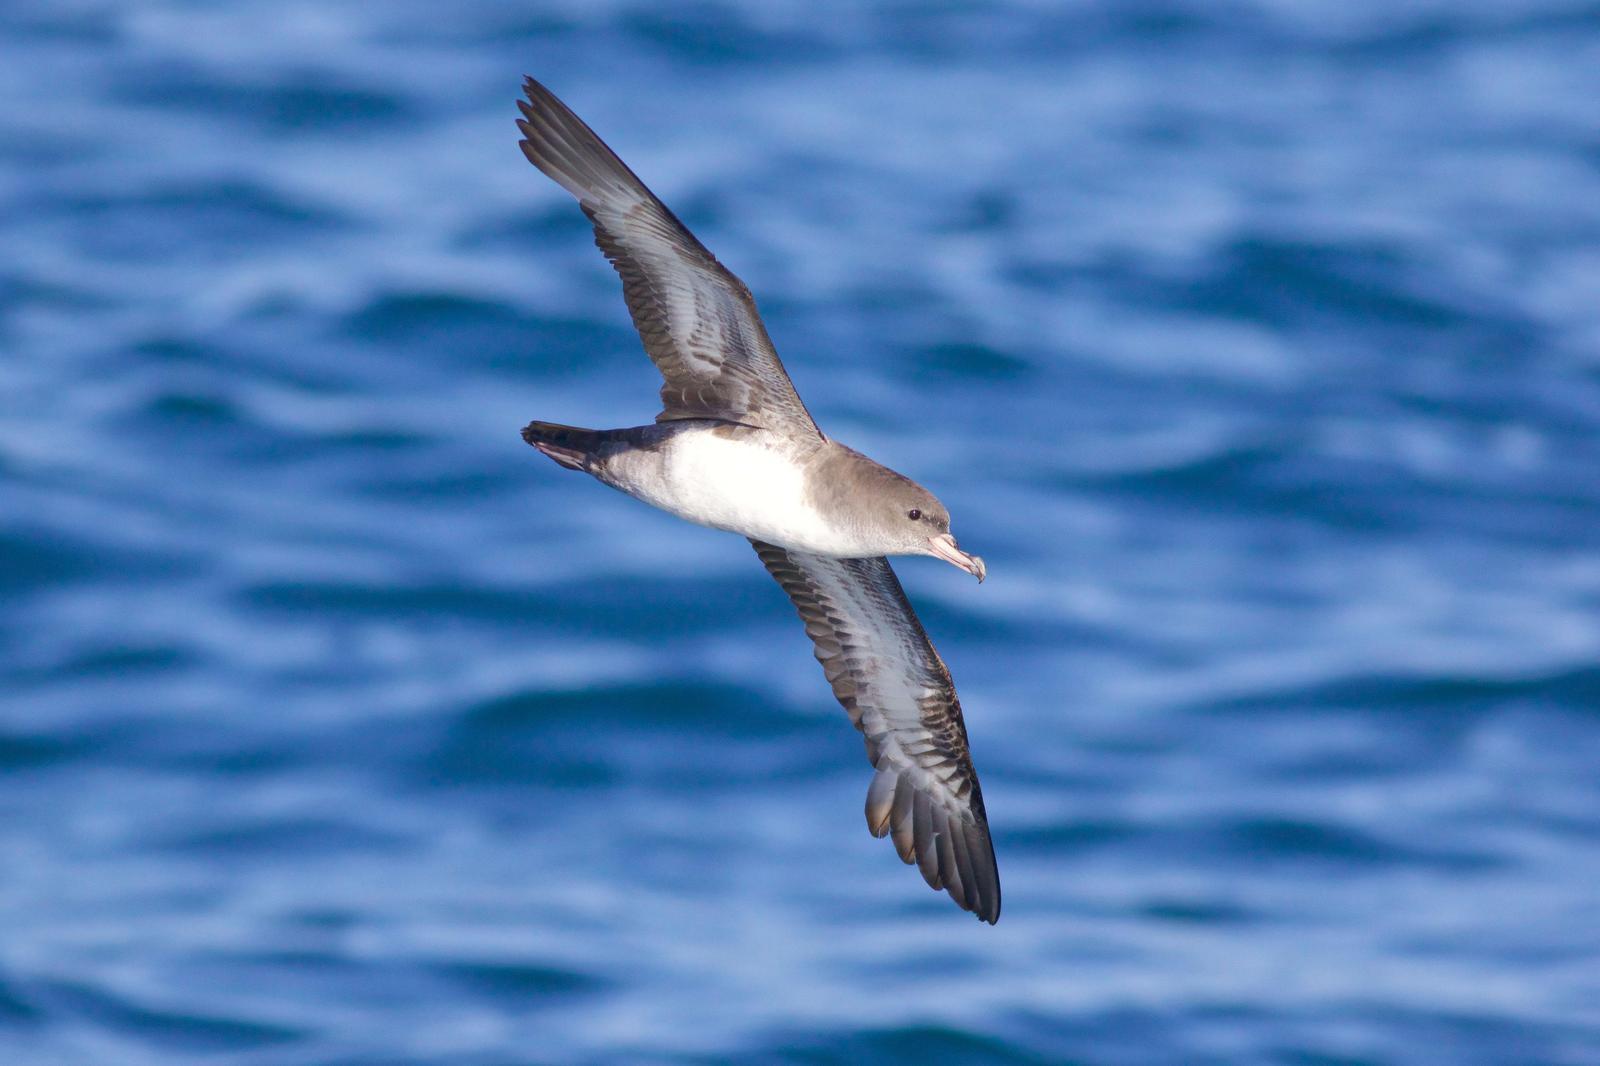 Pink-footed Shearwater Photo by Tom Ford-Hutchinson